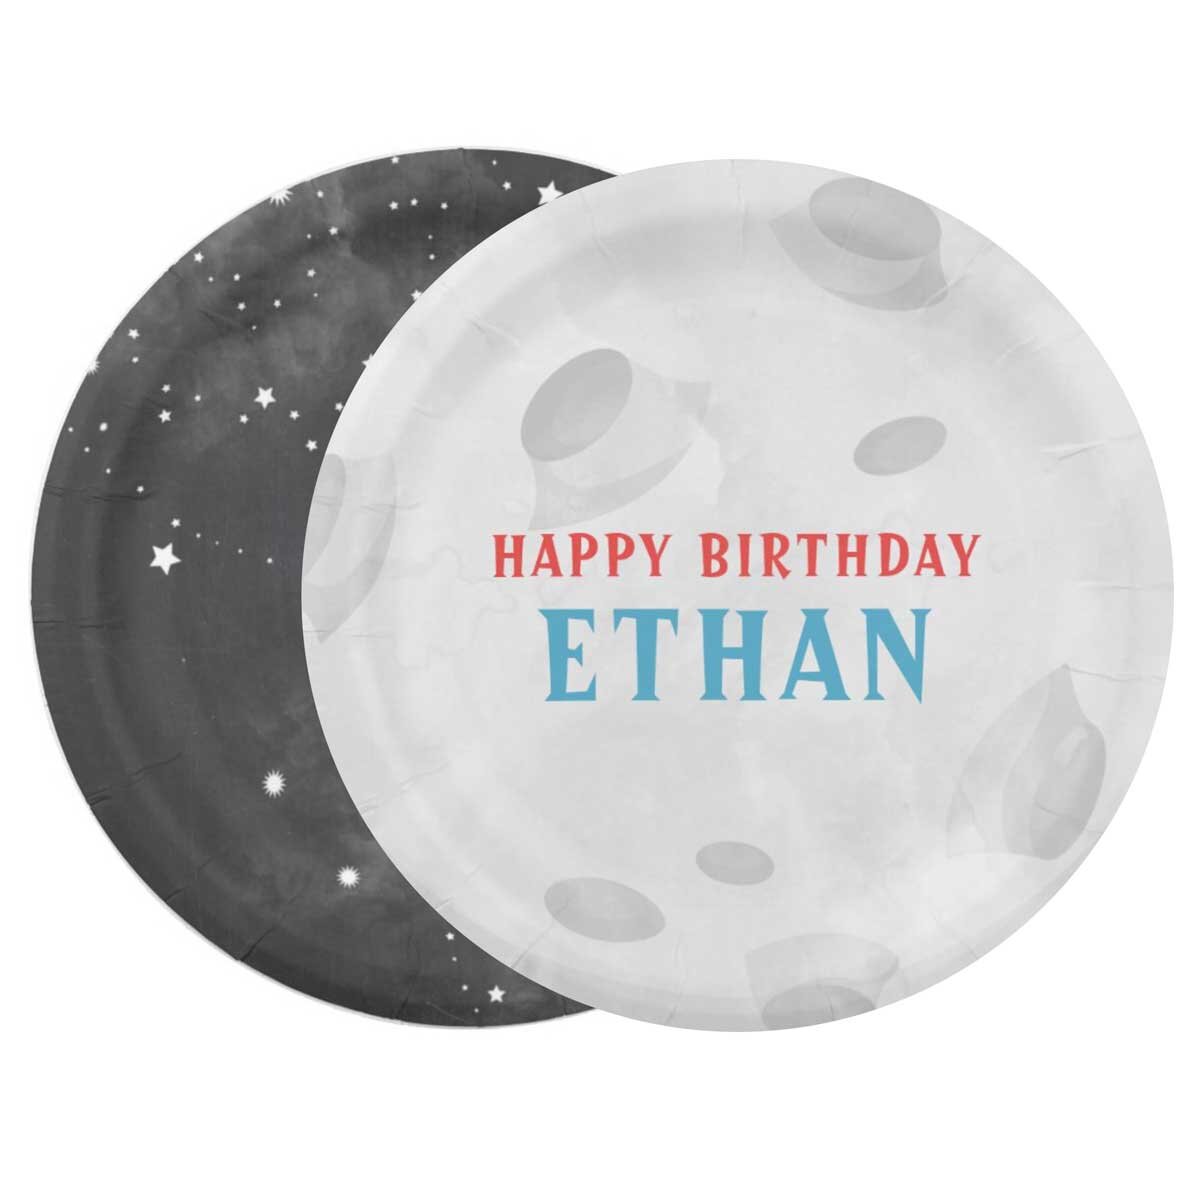 OUTER SPACE BIRTHDAY PLATES